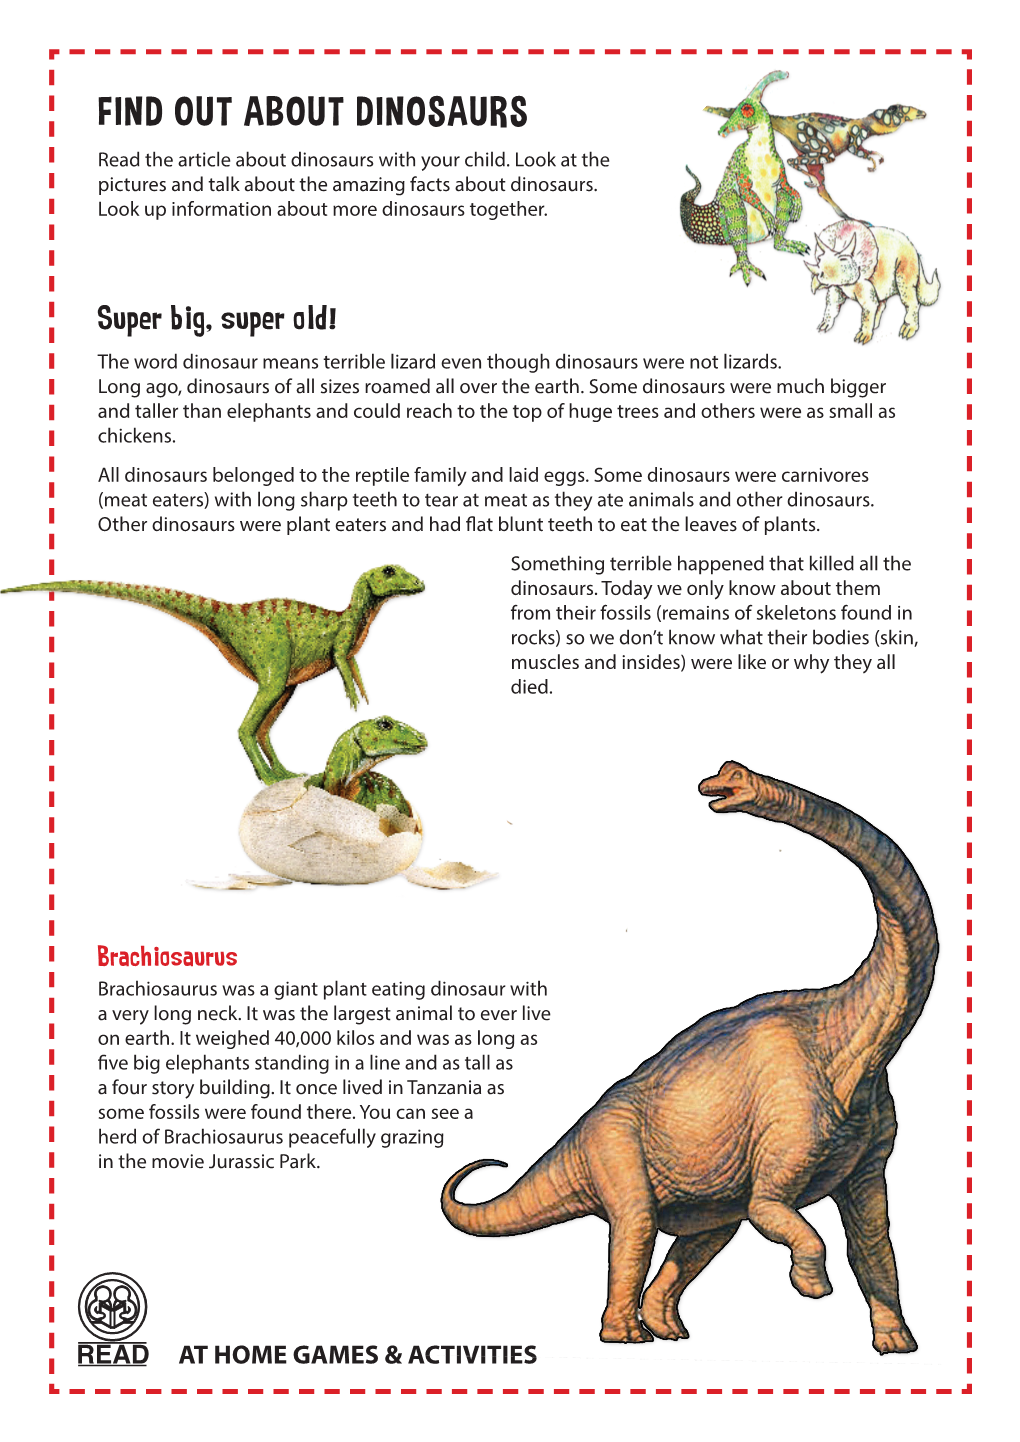 FIND out ABOUT DINOSAURS Read the Article About Dinosaurs with Your Child